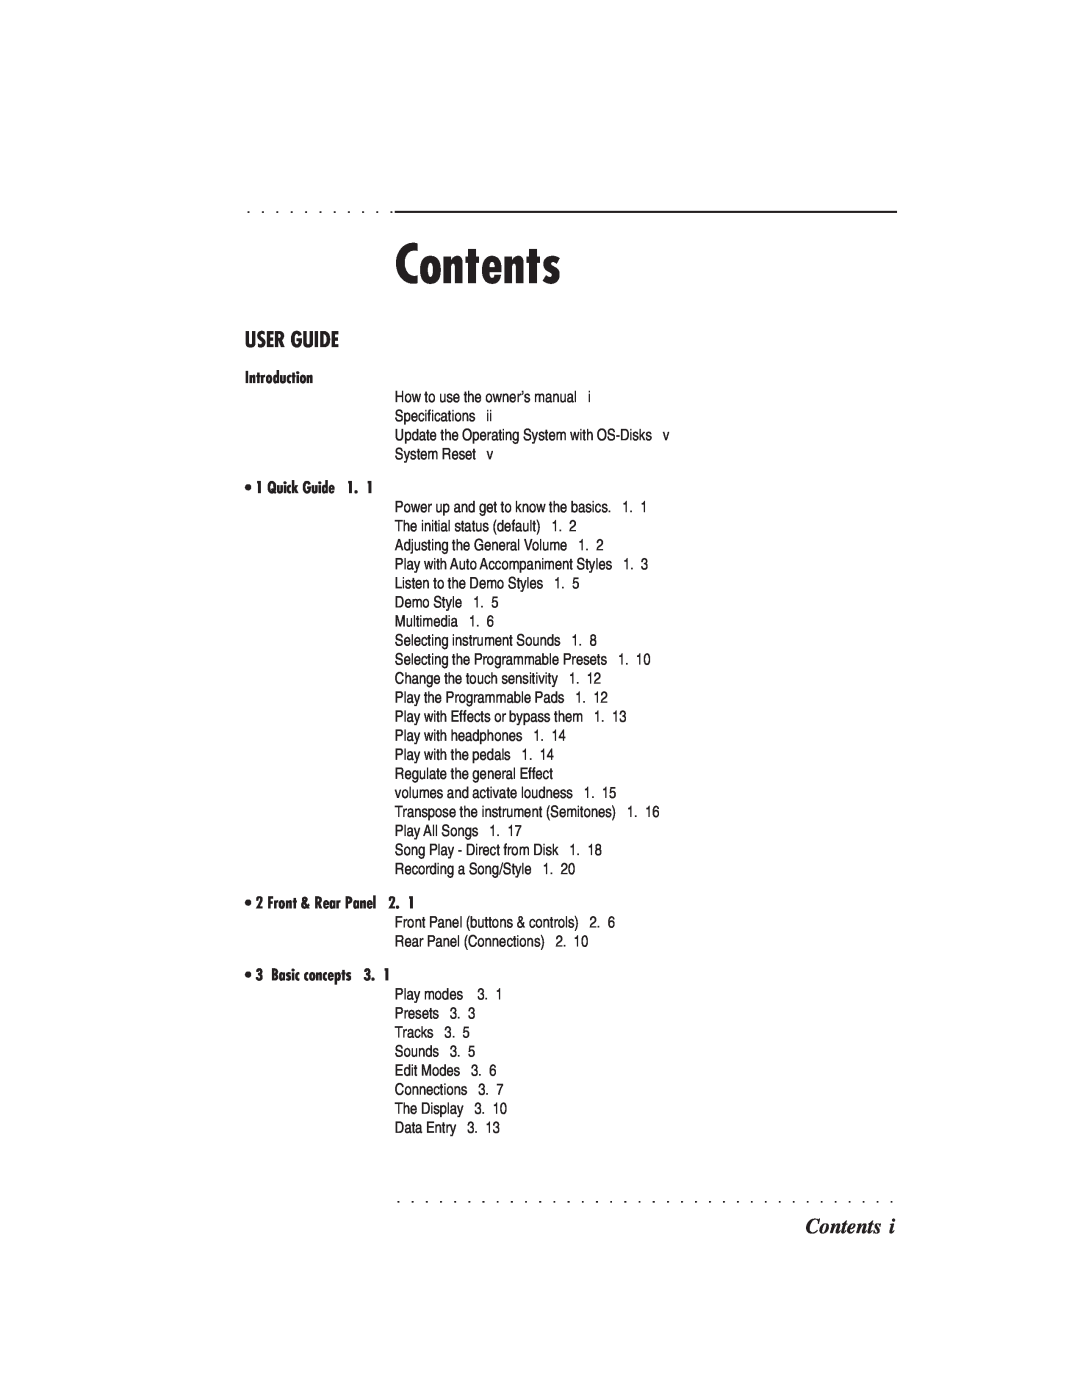 IBM PS1500 owner manual Contents, User Guide 